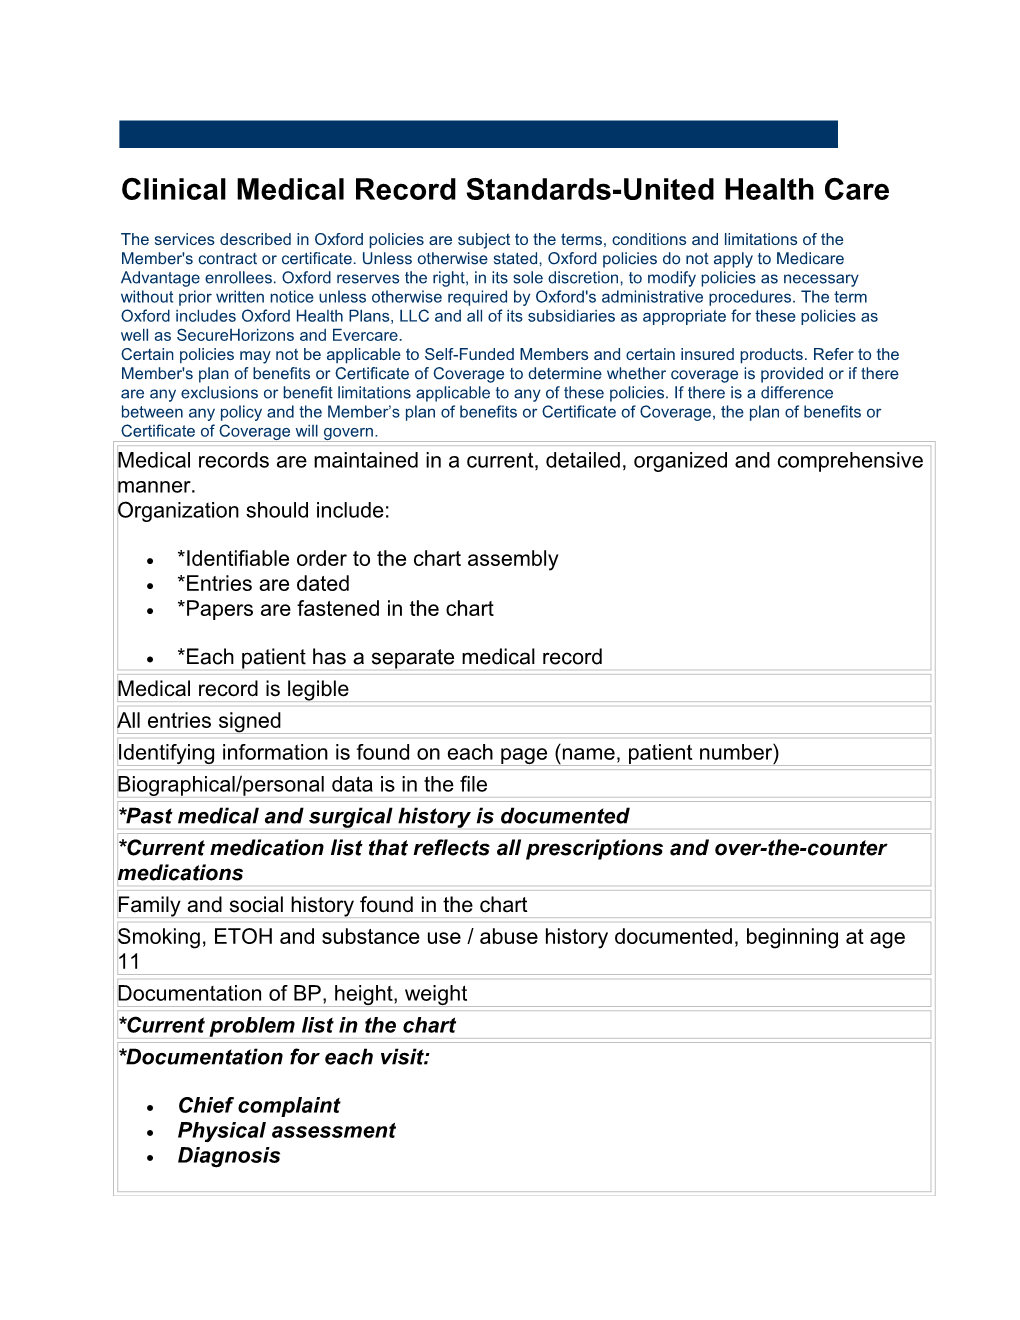 Clinical Medical Record Standards-United Health Care